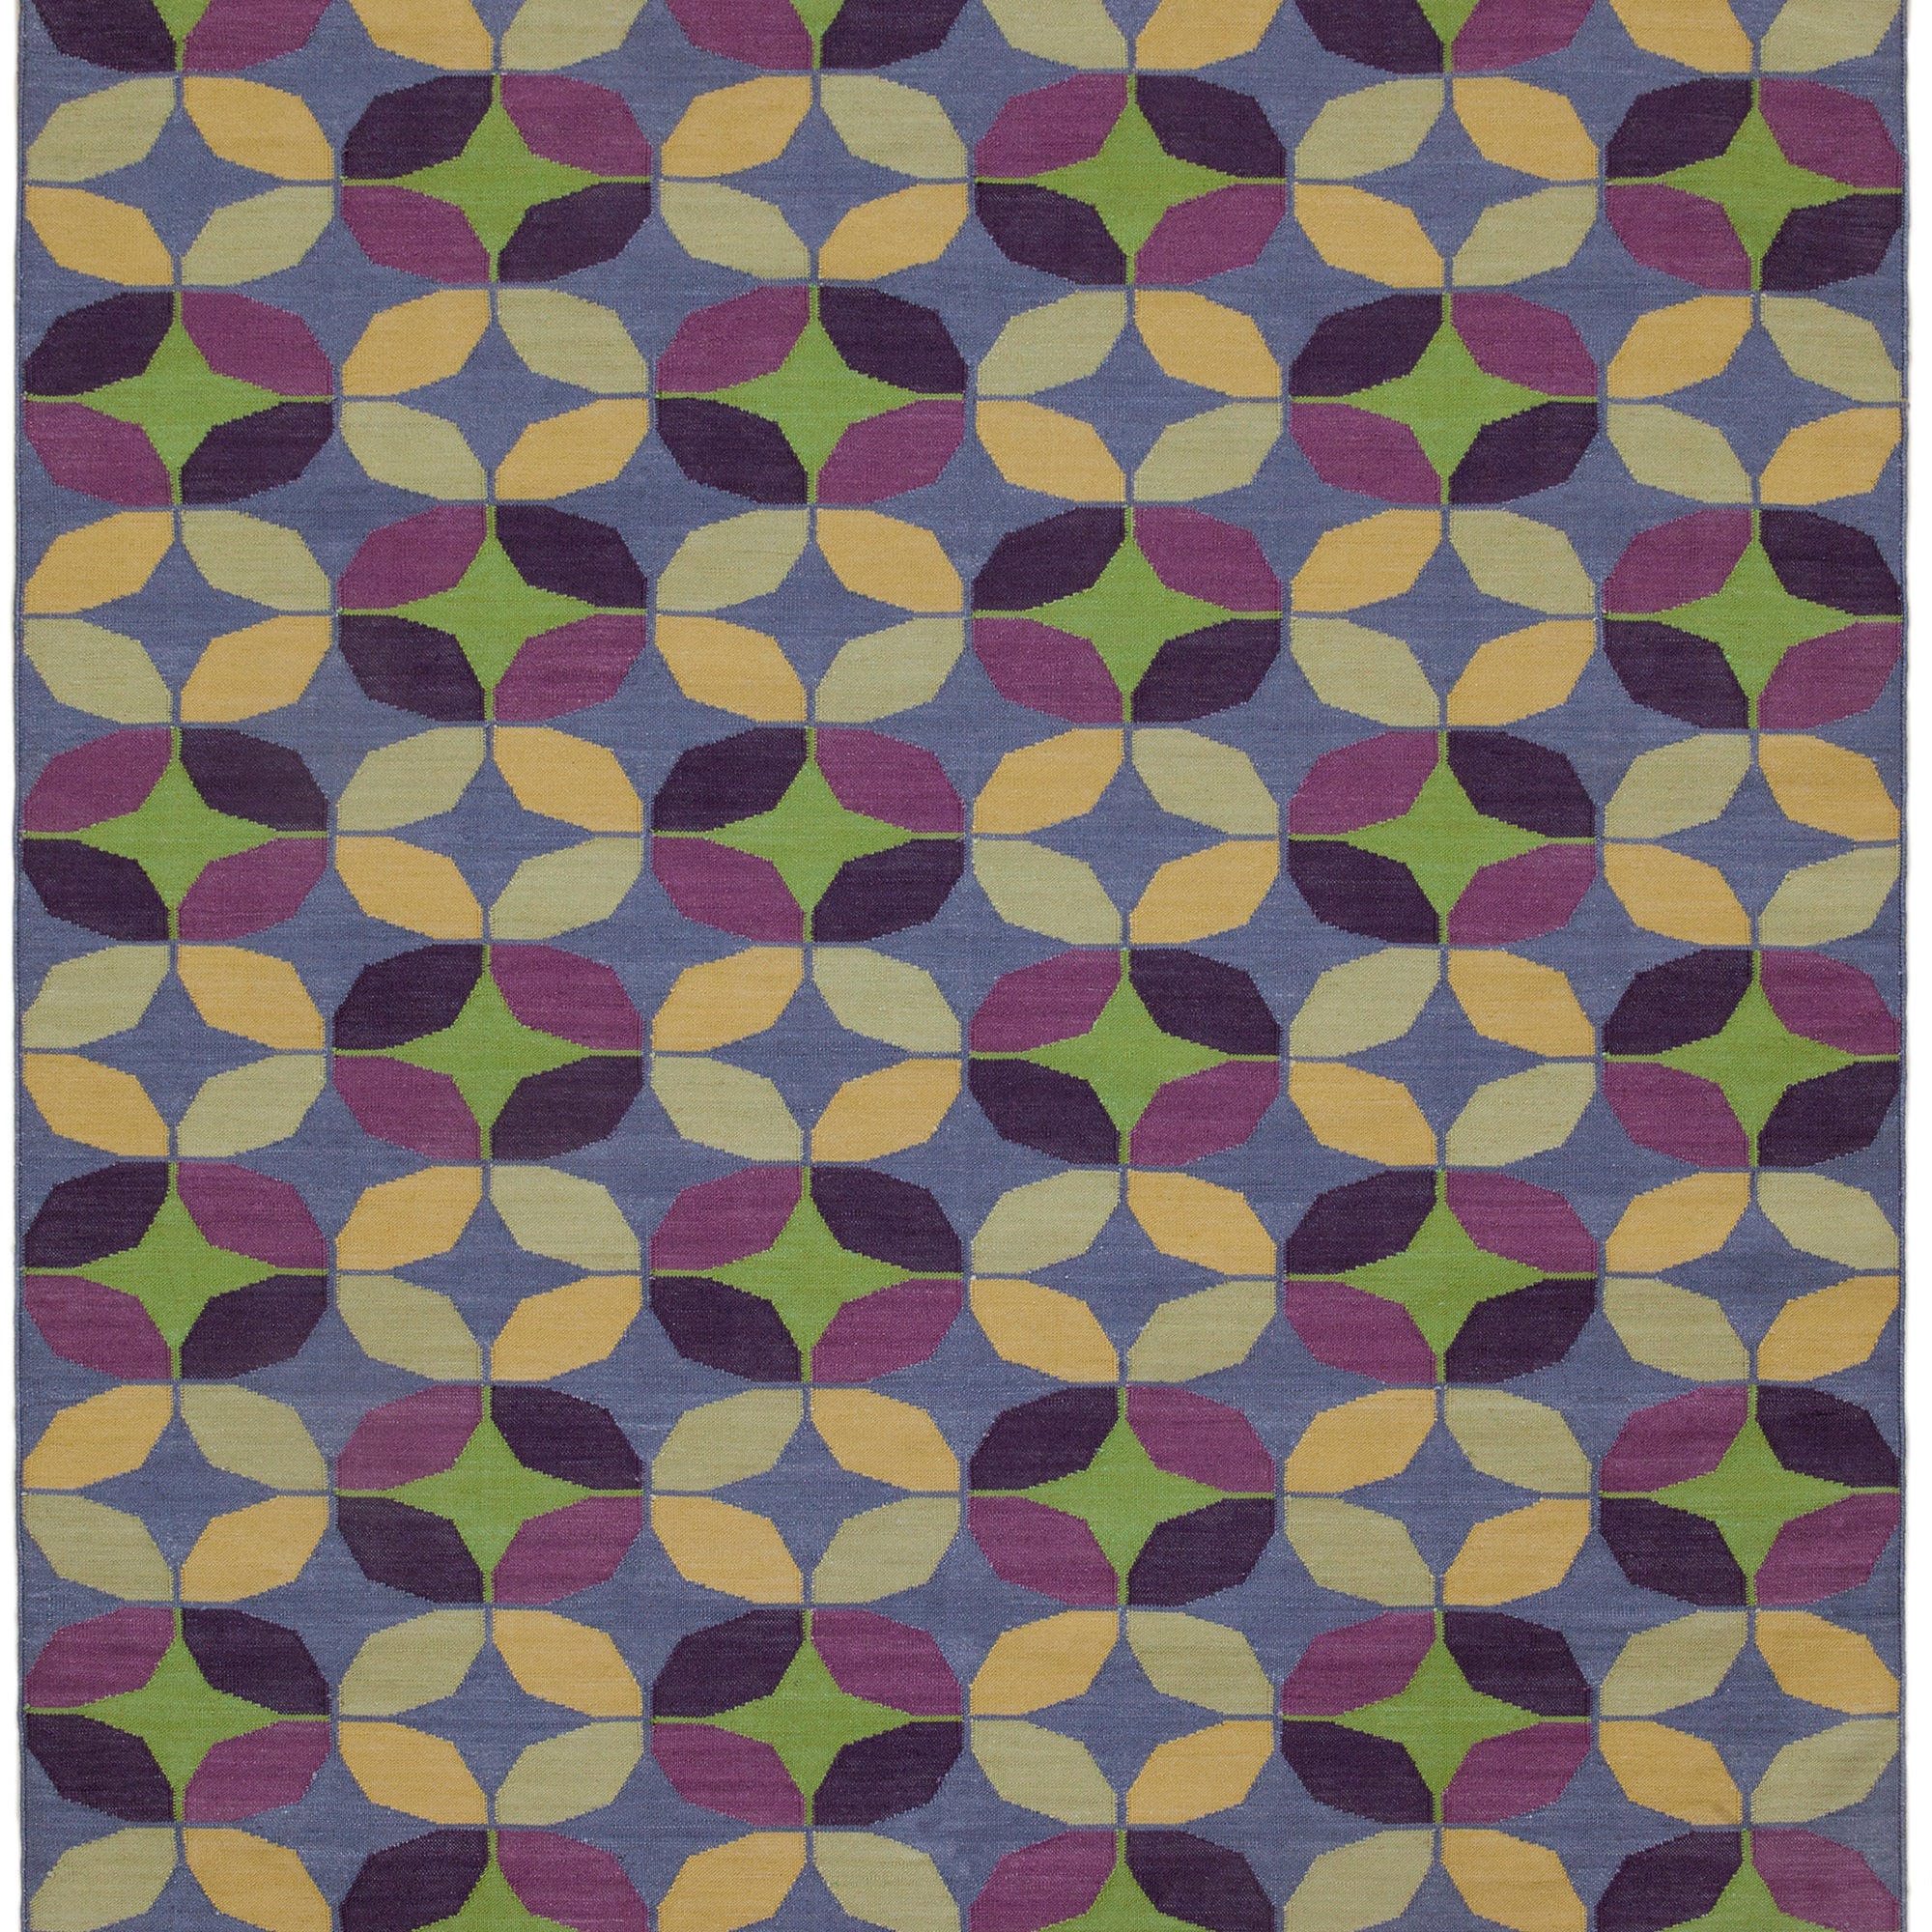 Full size Alhambra Rug in multi color yellow, green, magenta, purple and blue featuring a pattern of linked circles that create a star like lattice